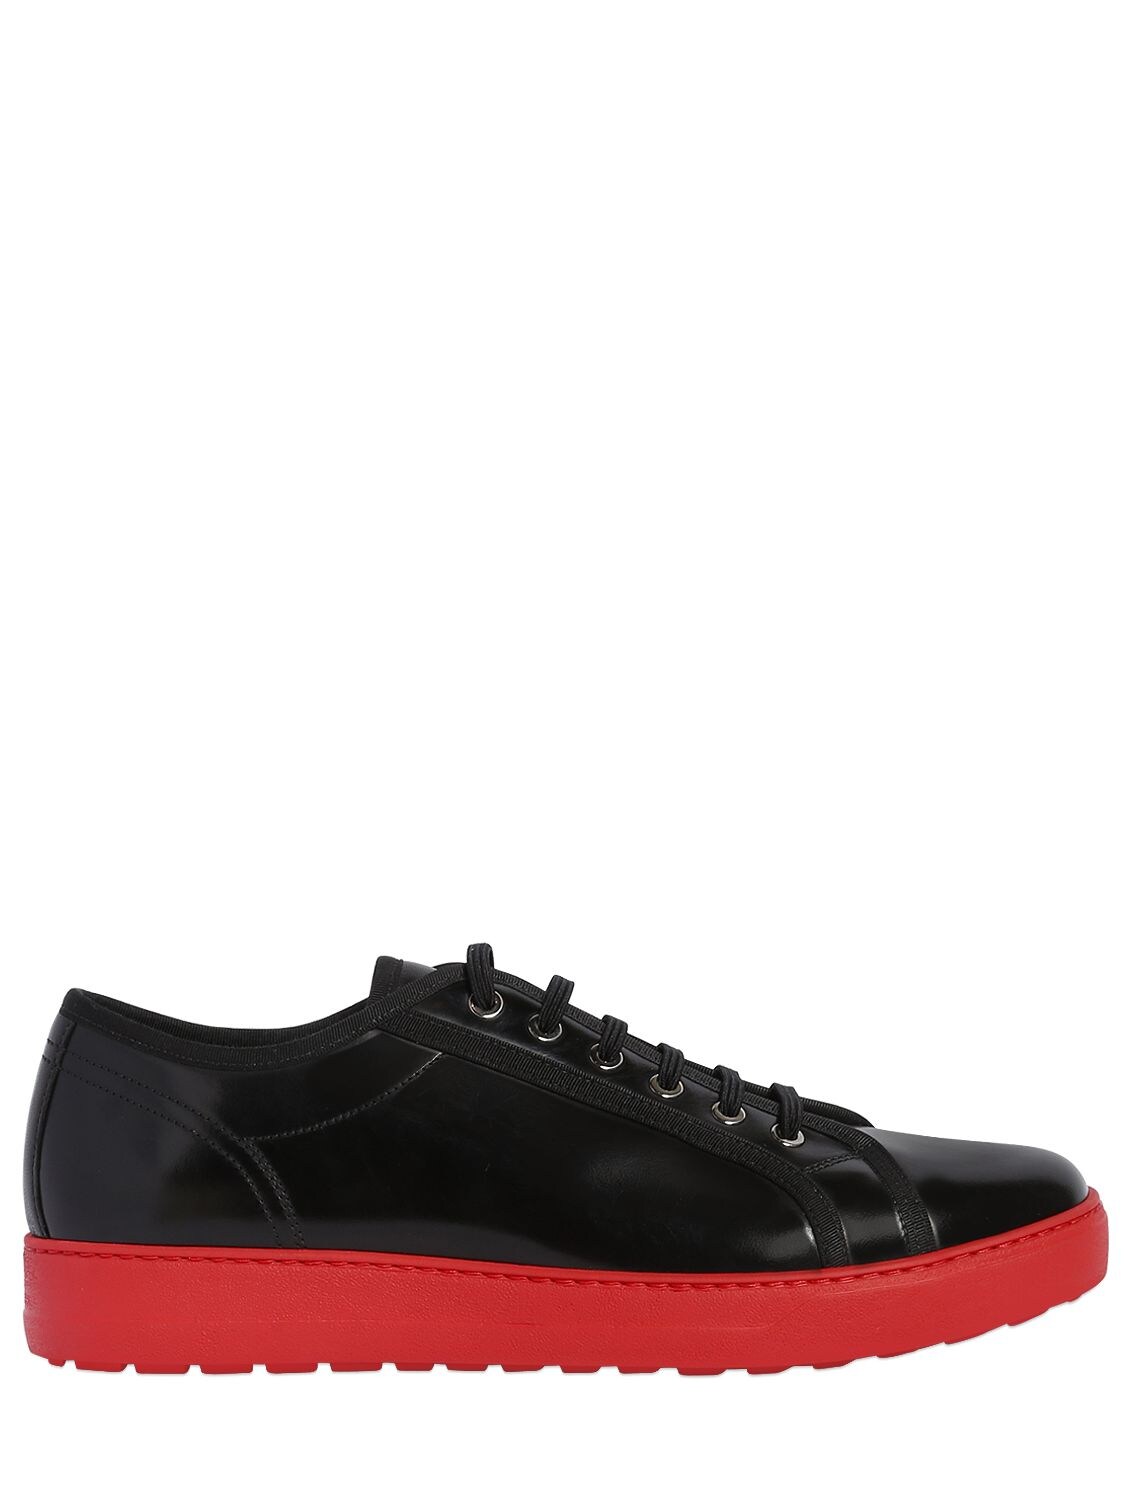 BICOLOR LEATHER SNEAKERS